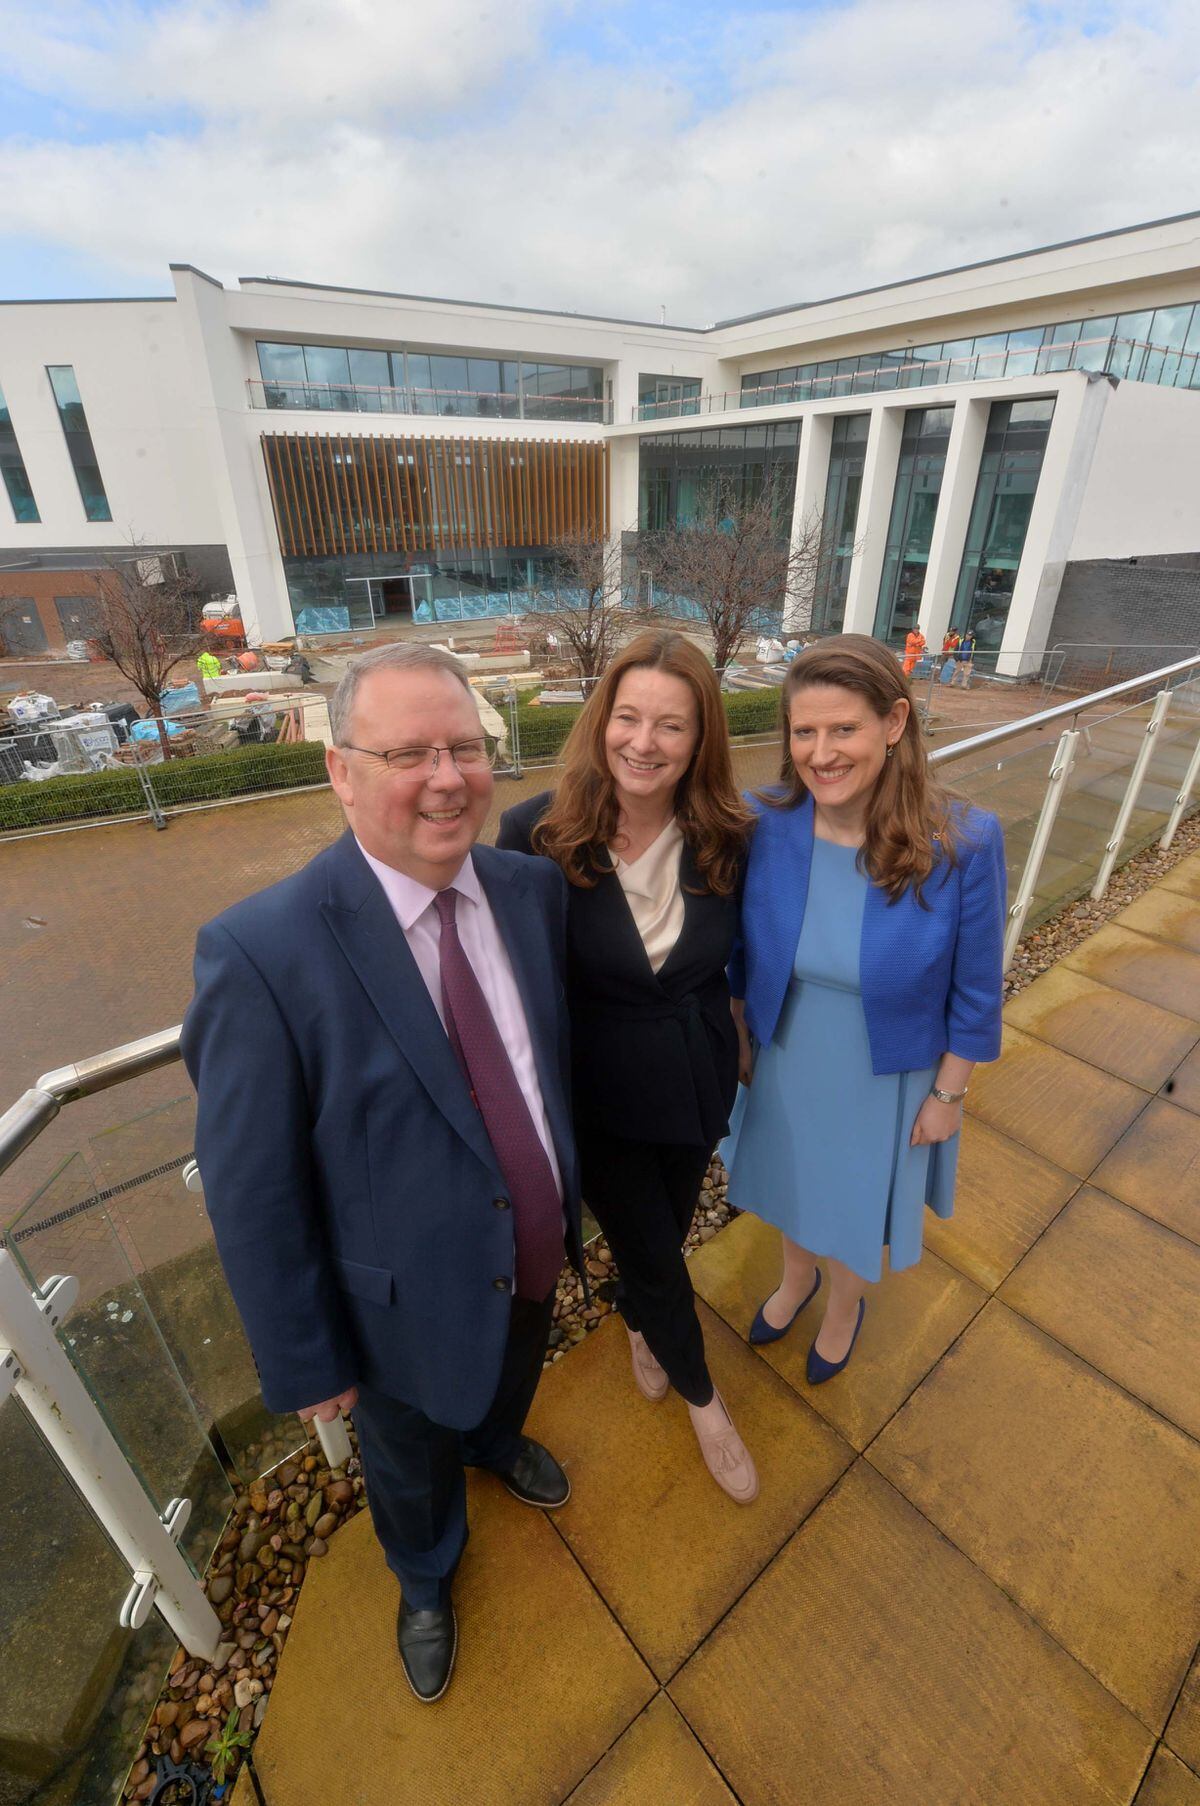 Pic at Stafford College where MP Theo Clarke (in light blue), Education Secretary: Gillian Keegan and Principal Craig Hodgson, were chatting to students and look around the new building